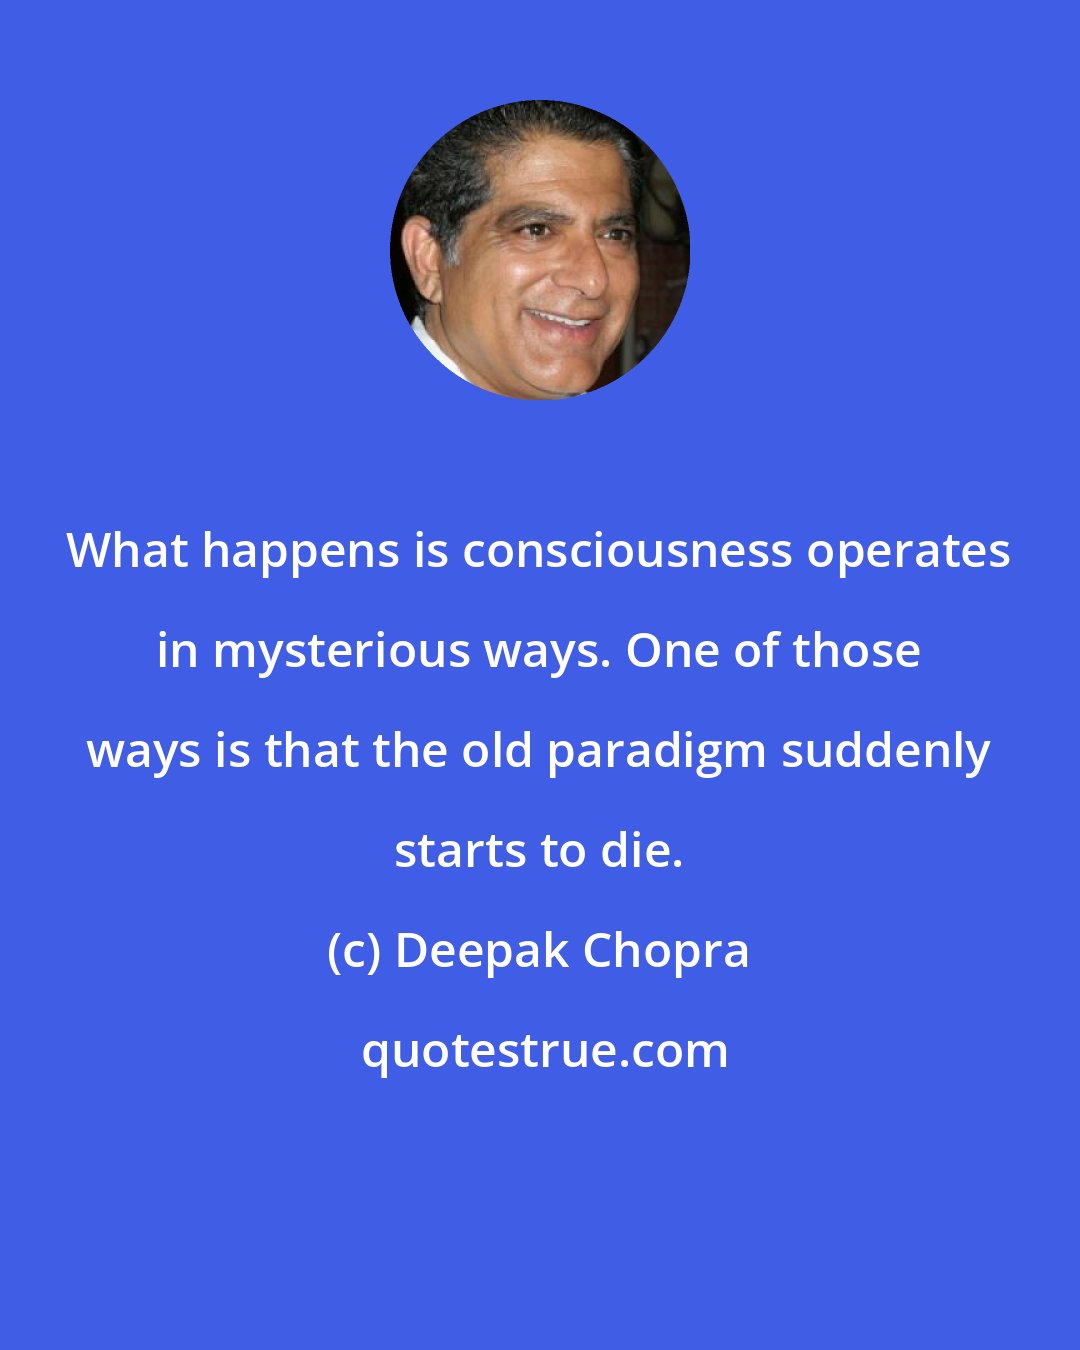 Deepak Chopra: What happens is consciousness operates in mysterious ways. One of those ways is that the old paradigm suddenly starts to die.